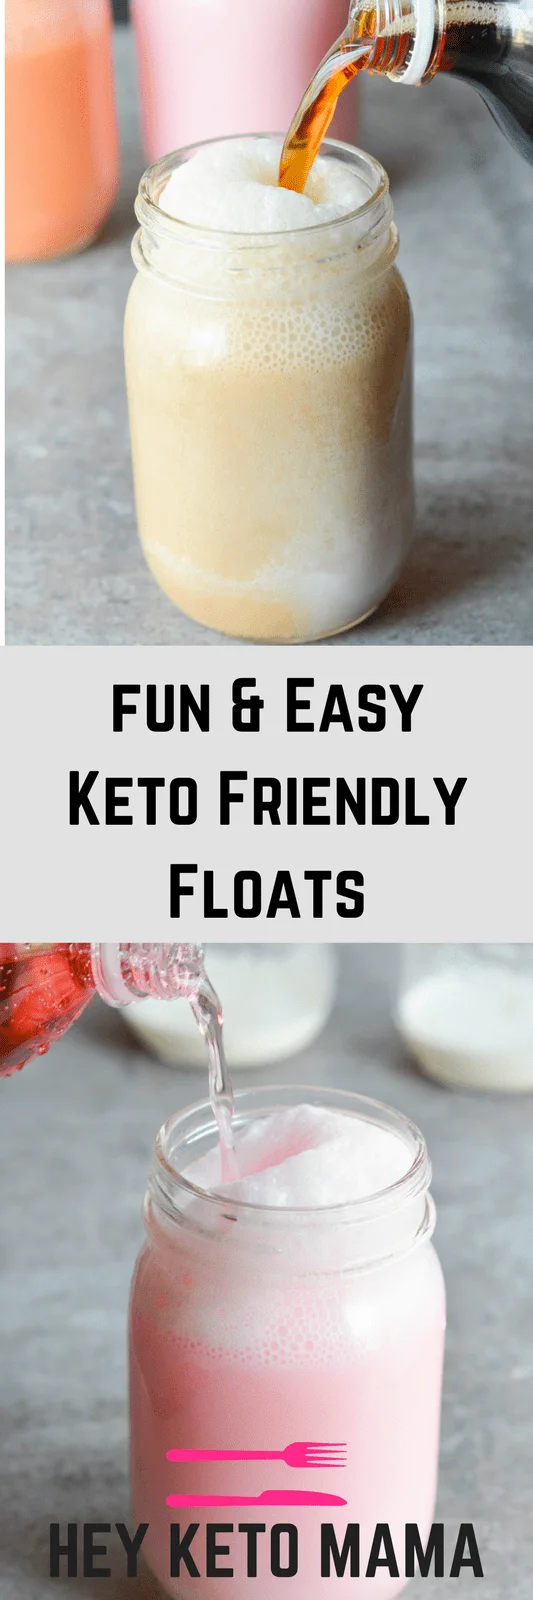 These Keto Friendly Floats will help you wash down your favorite meal in a low carb, high fat way! They’re ridiculously simple and amazingly yummy! | heyketomama.com